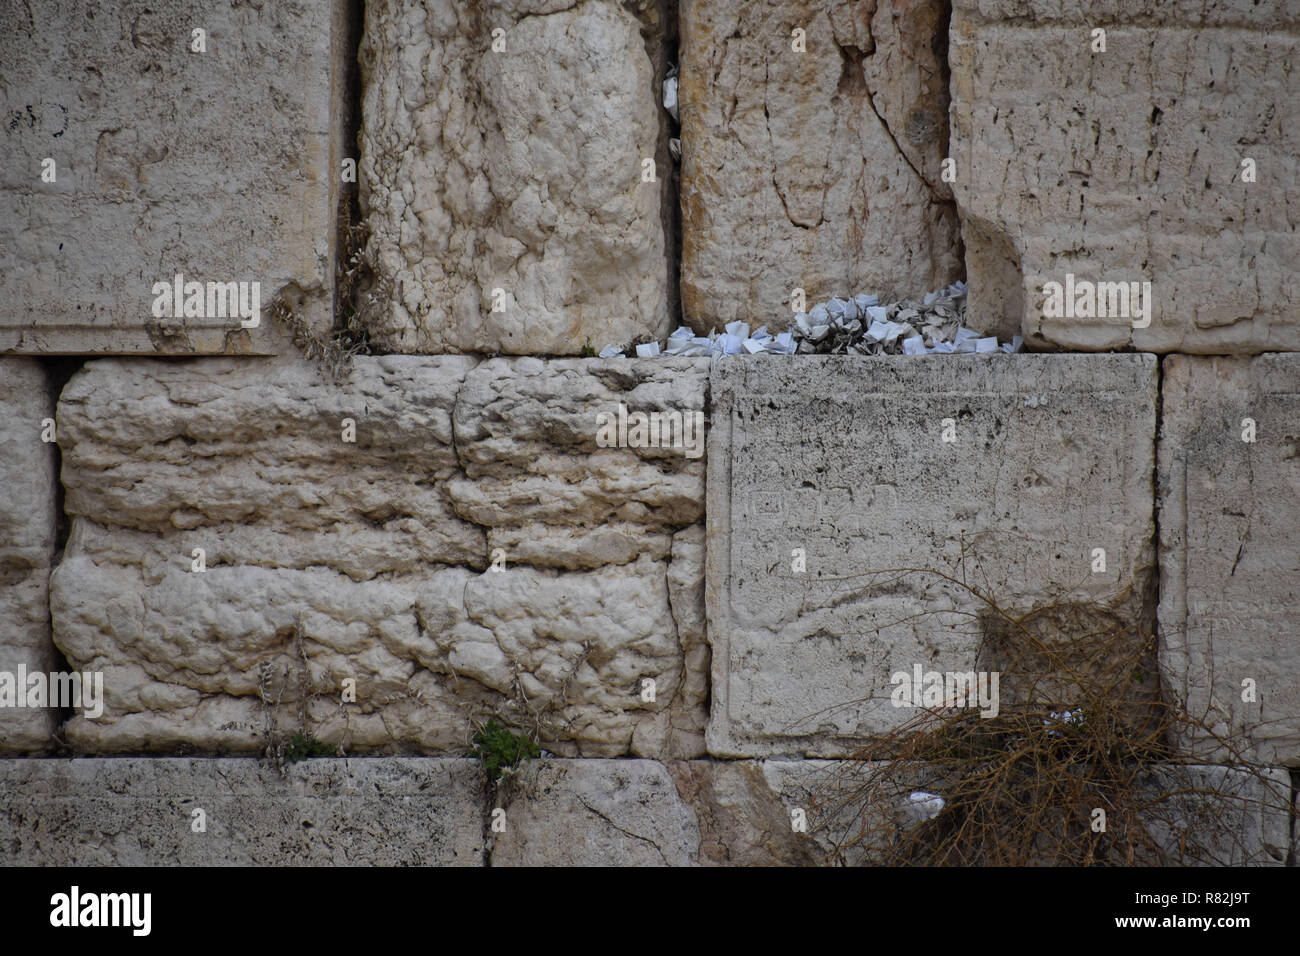 Piles of Folded Notes with Prayers in the Western Wall, Jerusalem Stock Photo